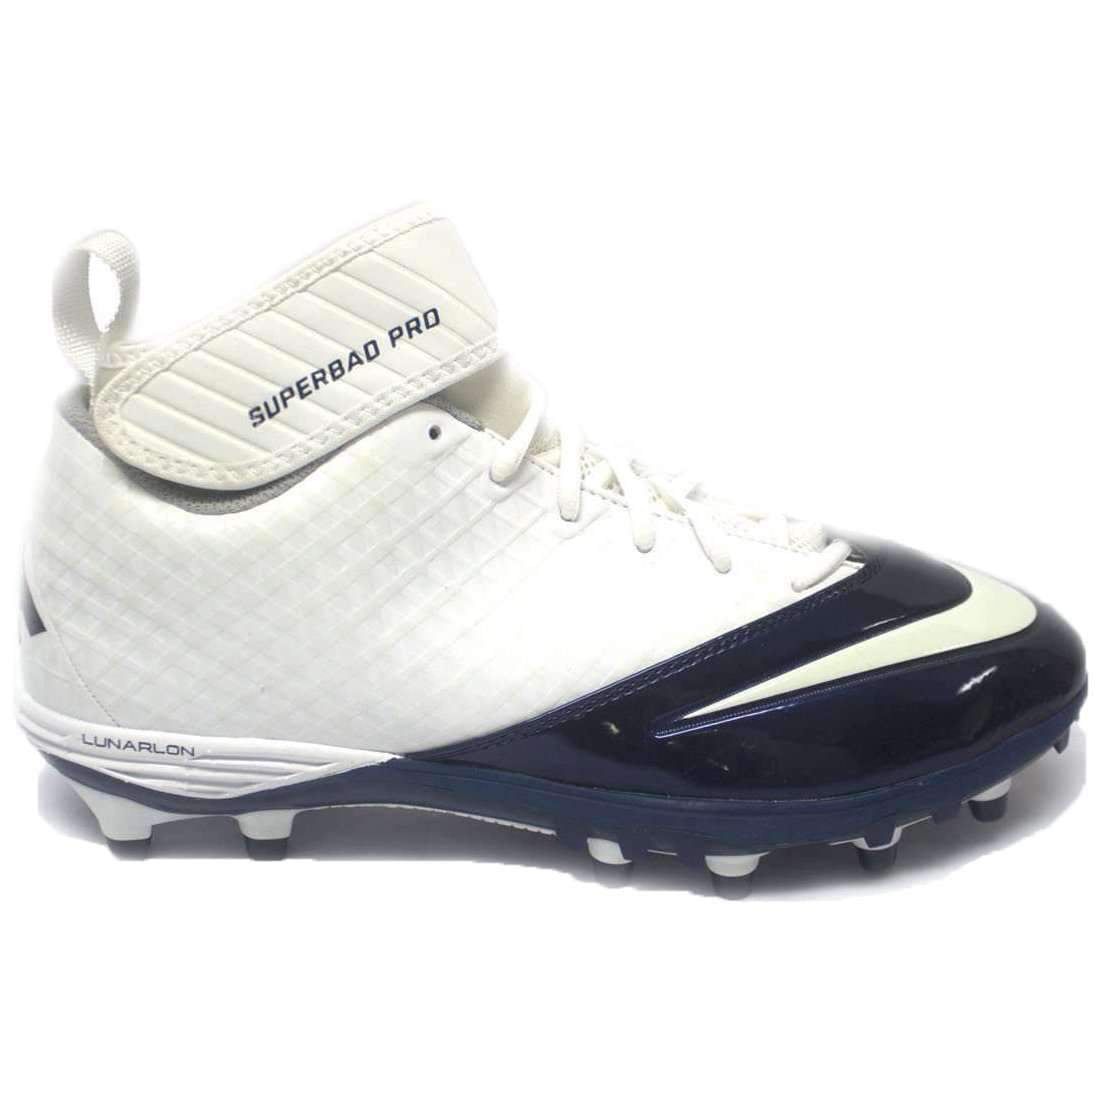 nike superbad pro cleats review